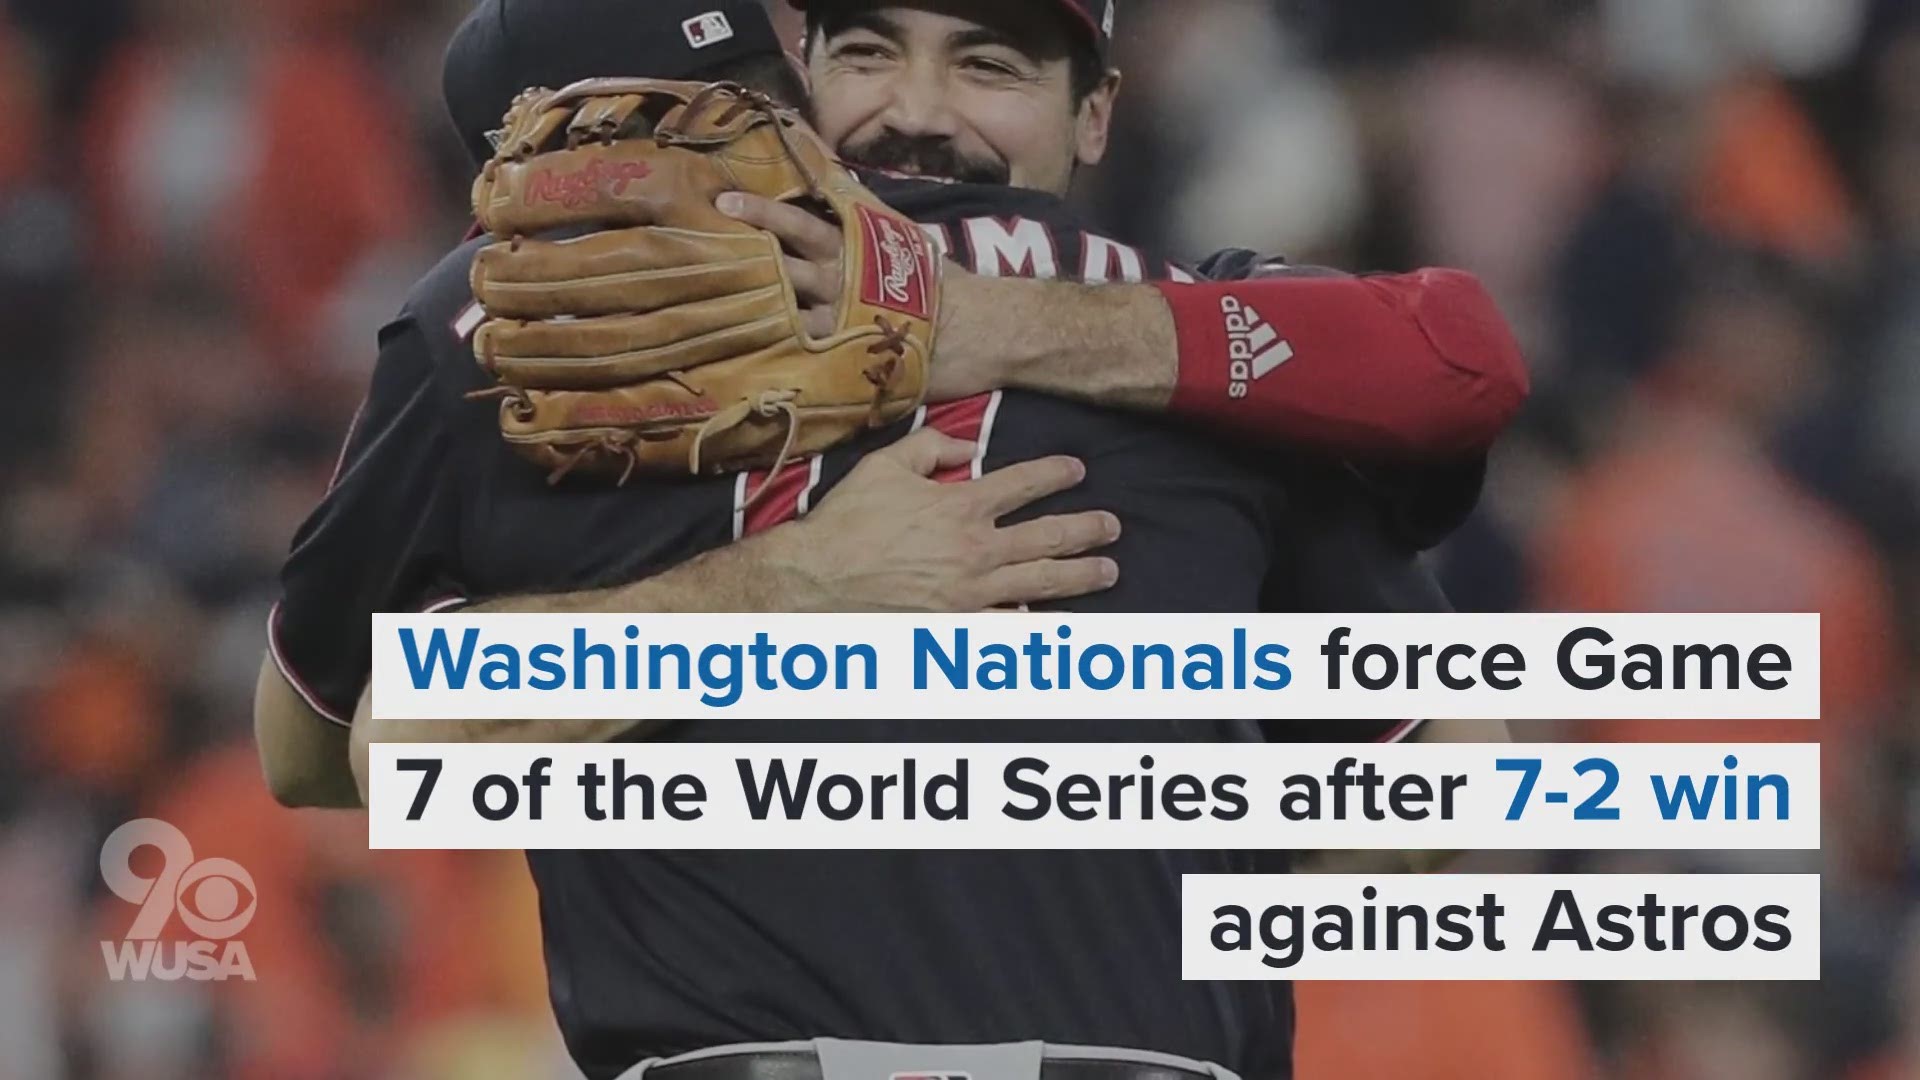 Washington Nationals win Game 6 of the World series after 7-2 win against the Houston Astros. The series is now tied 3-3.